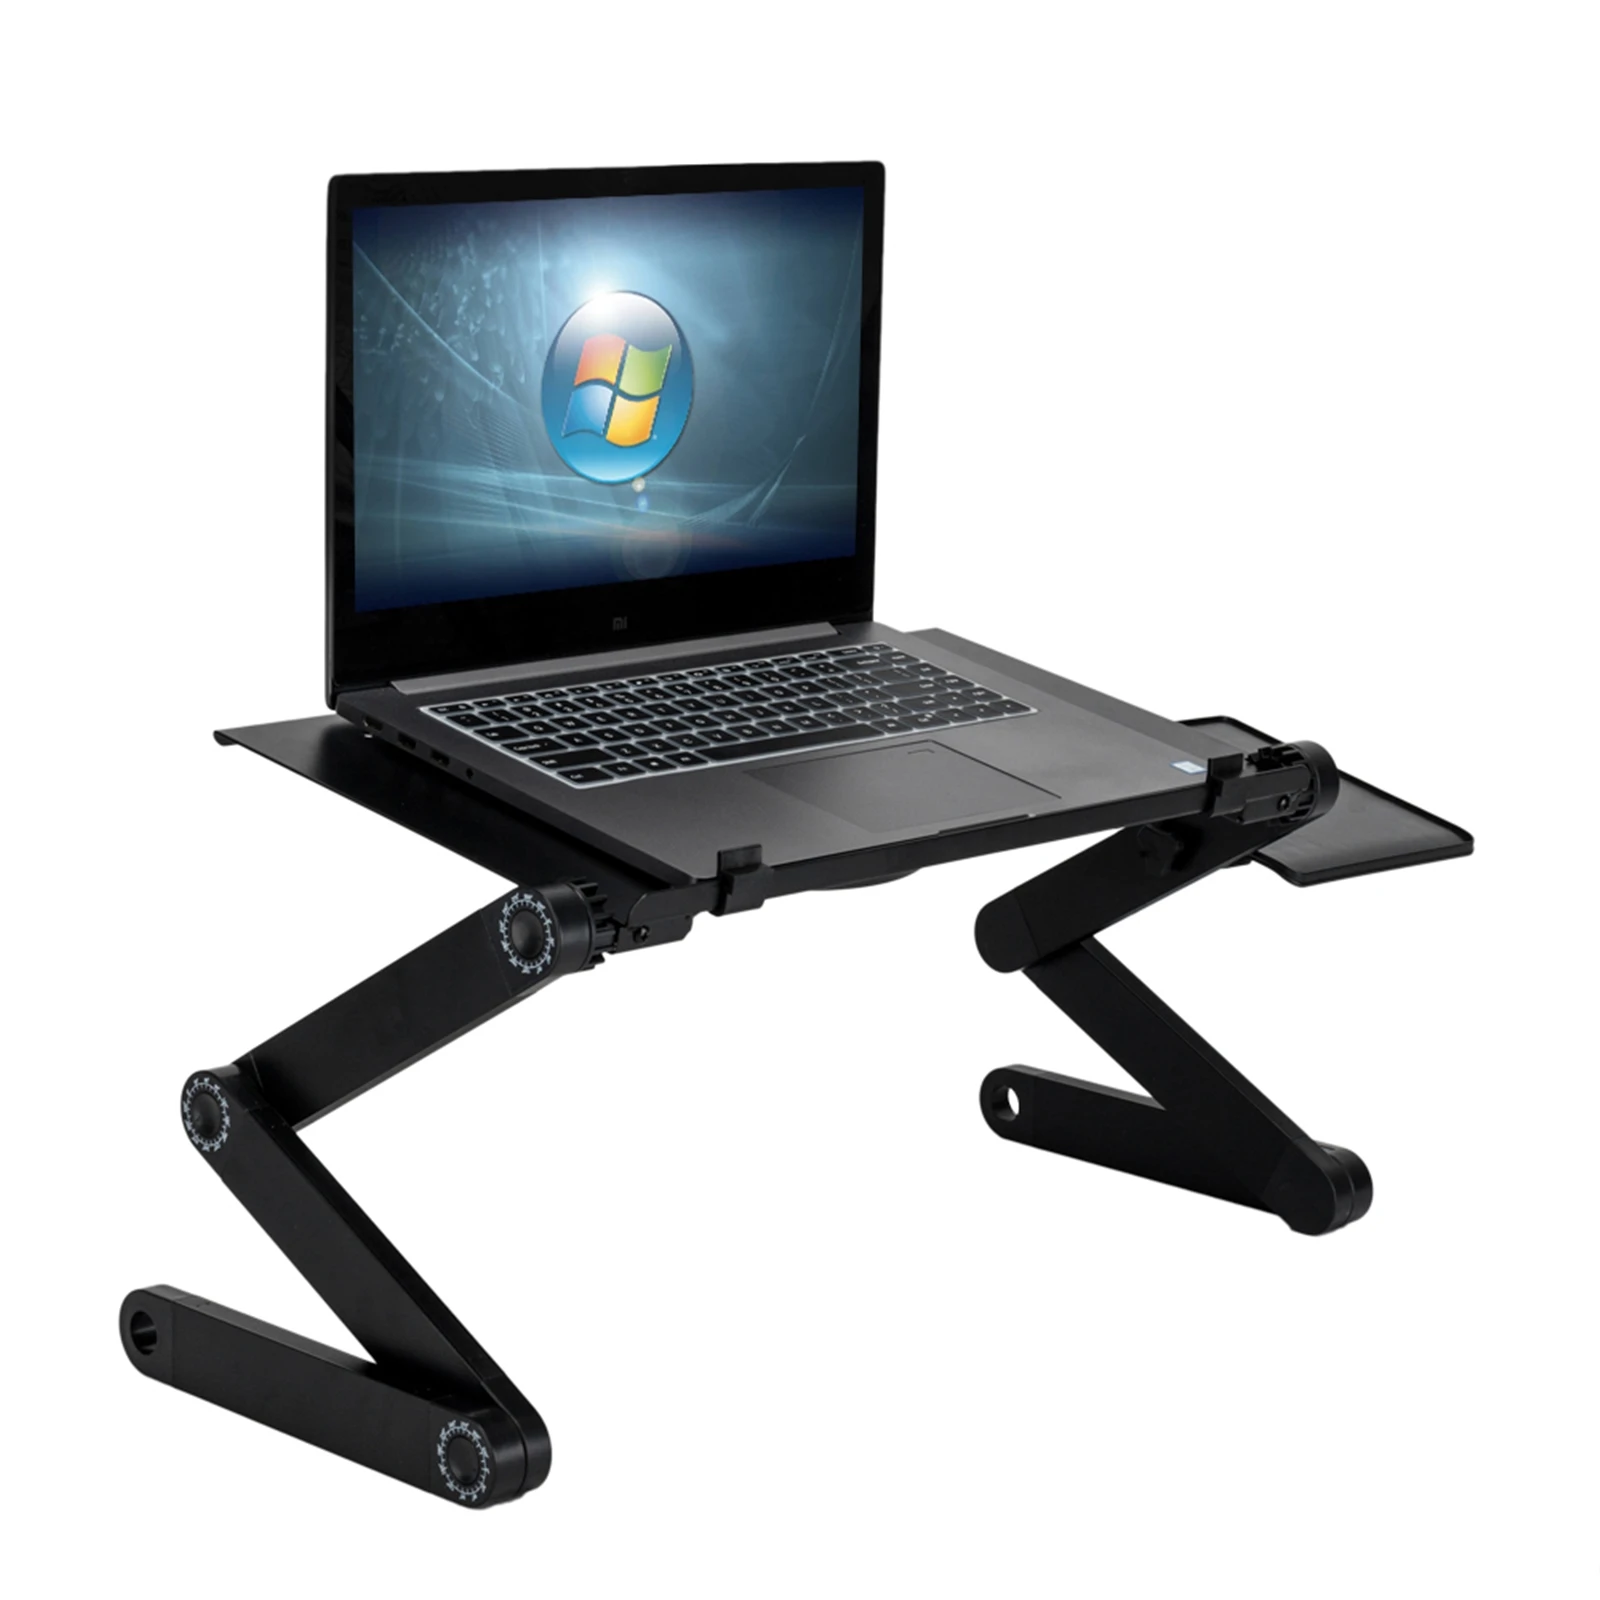 Adjustable Aluminum Laptop Desk Portable Computer Desk Bed Lapdesk Tray PC Table Stand Notebook Table Desk Stand with Mouse Pad